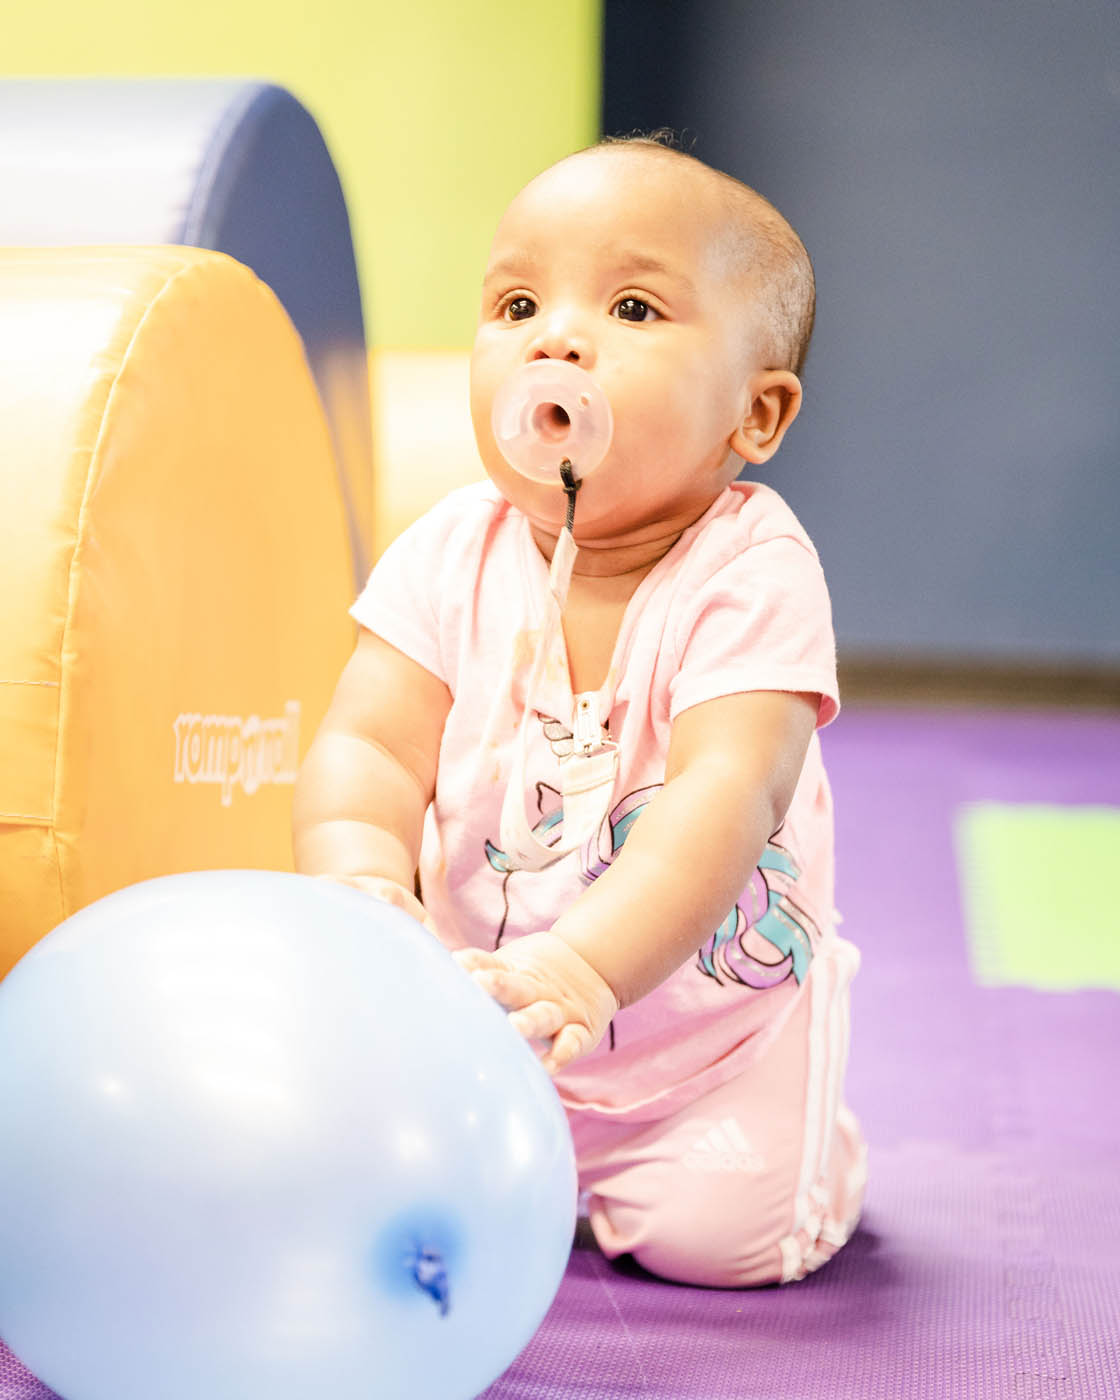 A baby in a gym class working on basic motor skills and enjoying playing with a blue ball - Romp n' Roll in Willow Grove.